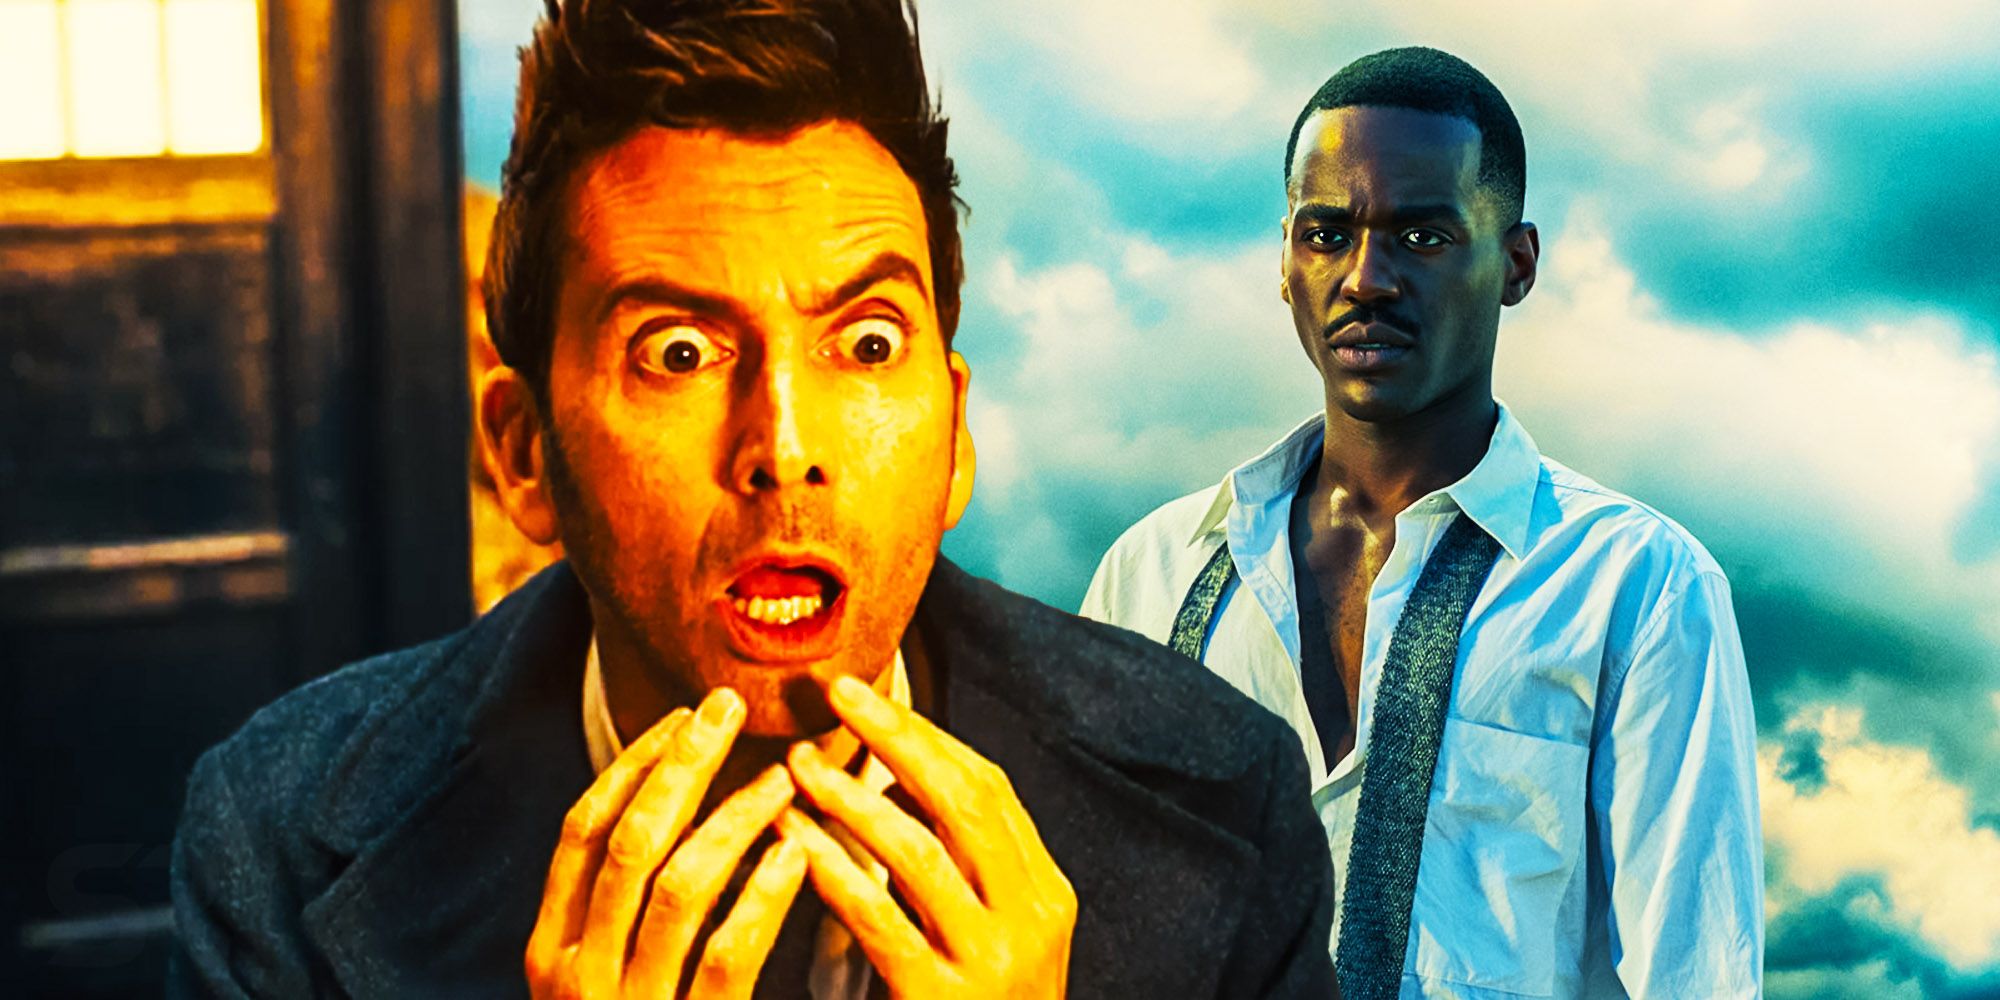 Blended image of David Tennant's Doctor looking shocked and Ncuti just looking blankly in Doctor Who